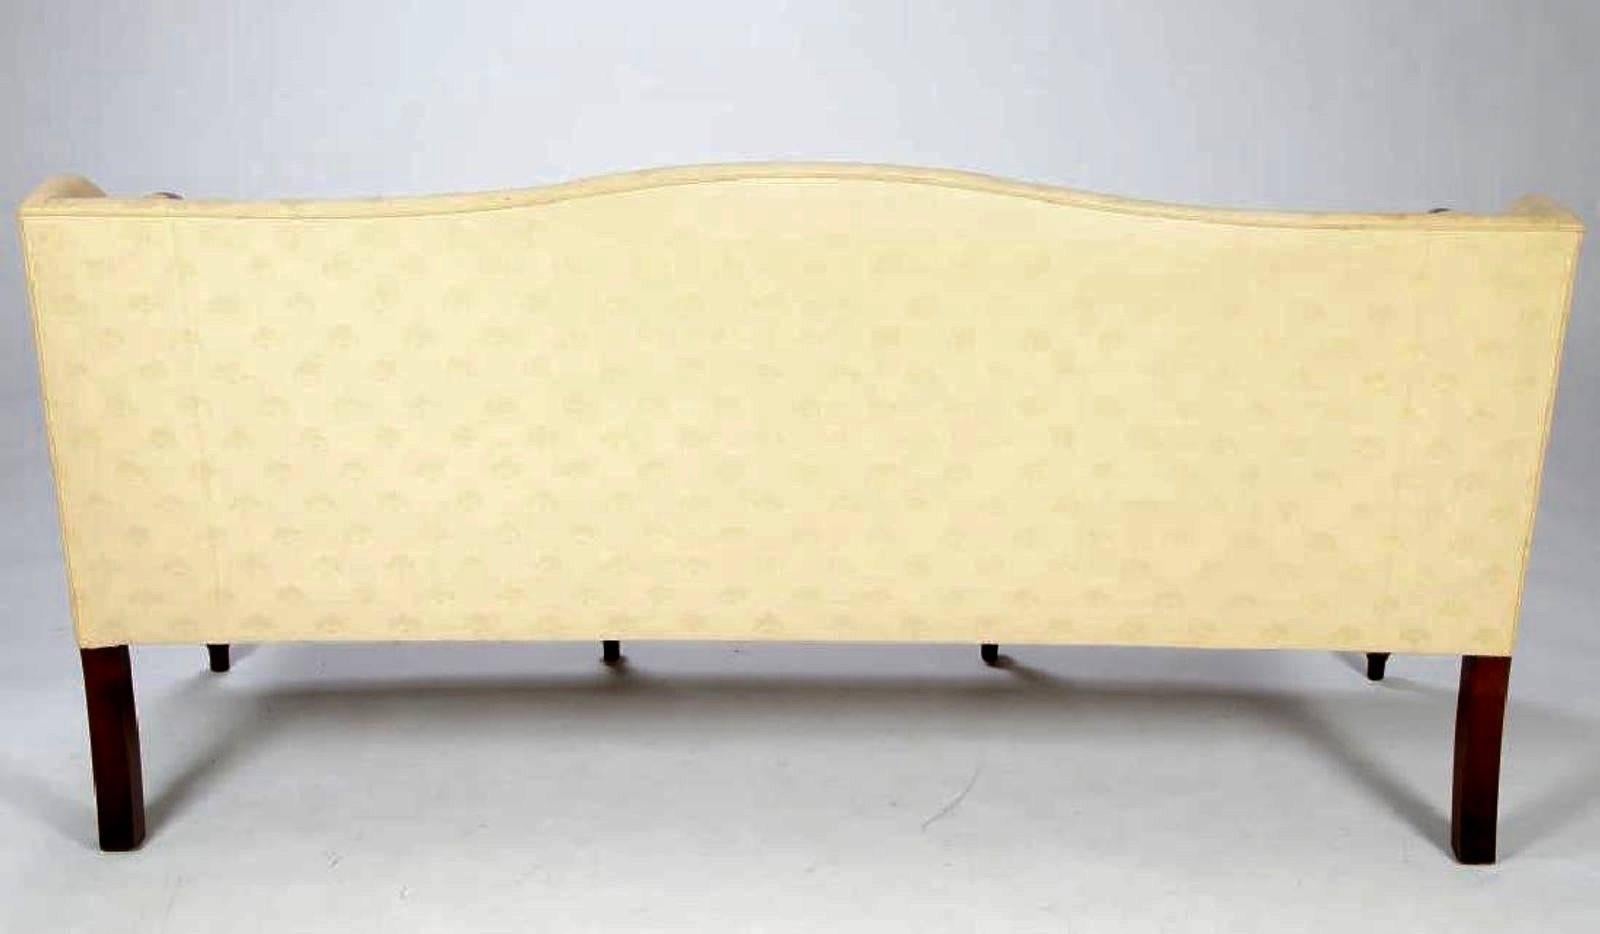 Sheraton Camel back sofa recently reupholstered in a high quality, off white damask with mahogany reeded legs and inlay. Measures: 35 x 71 x 27 inches.

